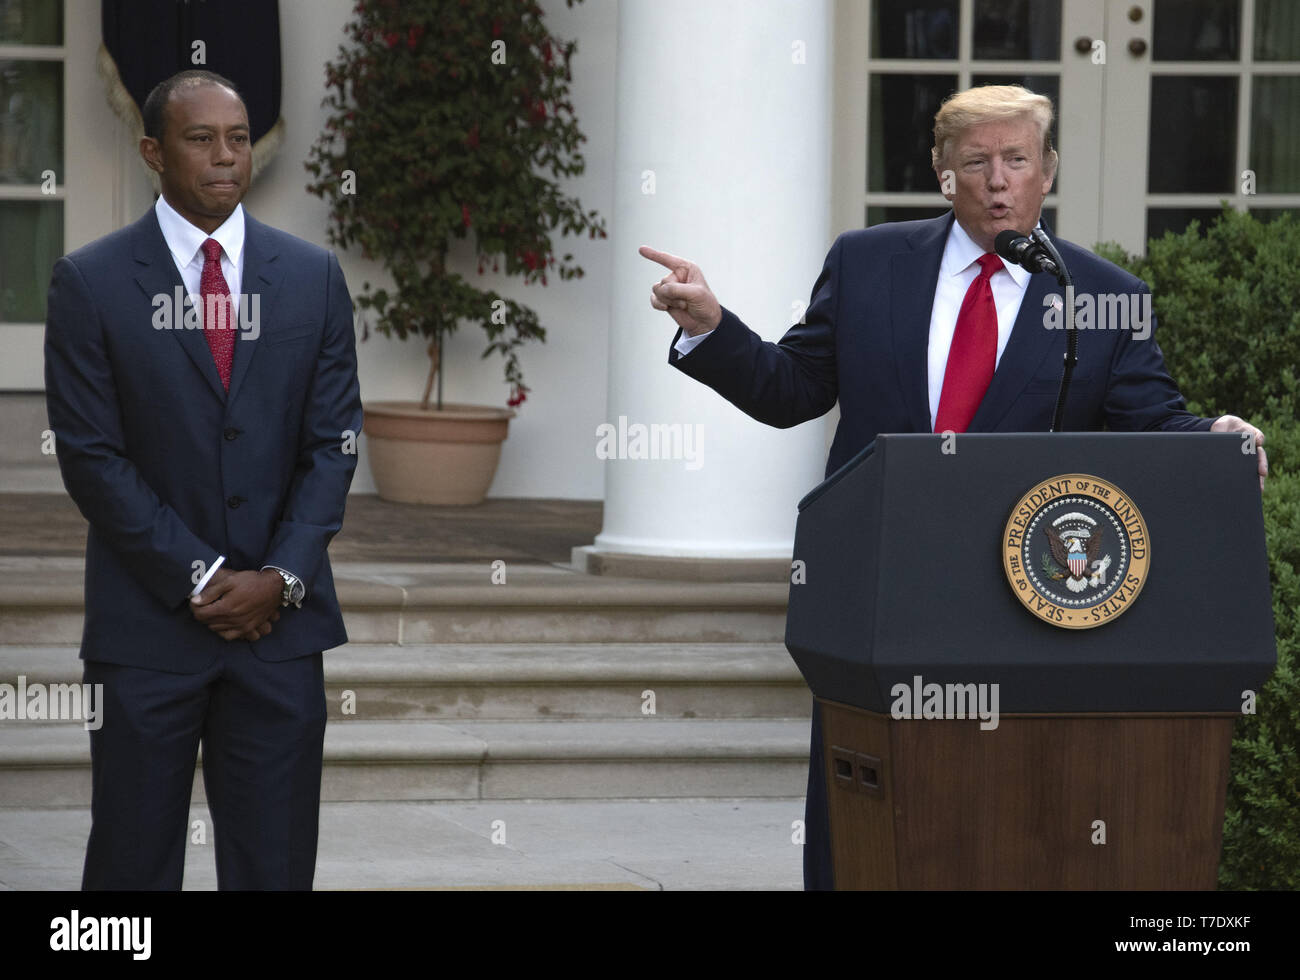 May 6, 2019 - Washington, District of Columbia, U.S. - United States President Donald J. Trump, right, makes remarks as he presents the Presidential Medal of Freedom to professional golfer Tiger Woods, left, in the Rose Garden of the White House in Washington, DC on May 6, 2019. The Presidential Medal of Freedom is an award bestowed by the President of the United States to recognize those people who have made ''an especially meritorious contribution to the security or national interests of the United States, world peace, cultural or other significant public or private endeavor.''.Credit: Ron Stock Photo